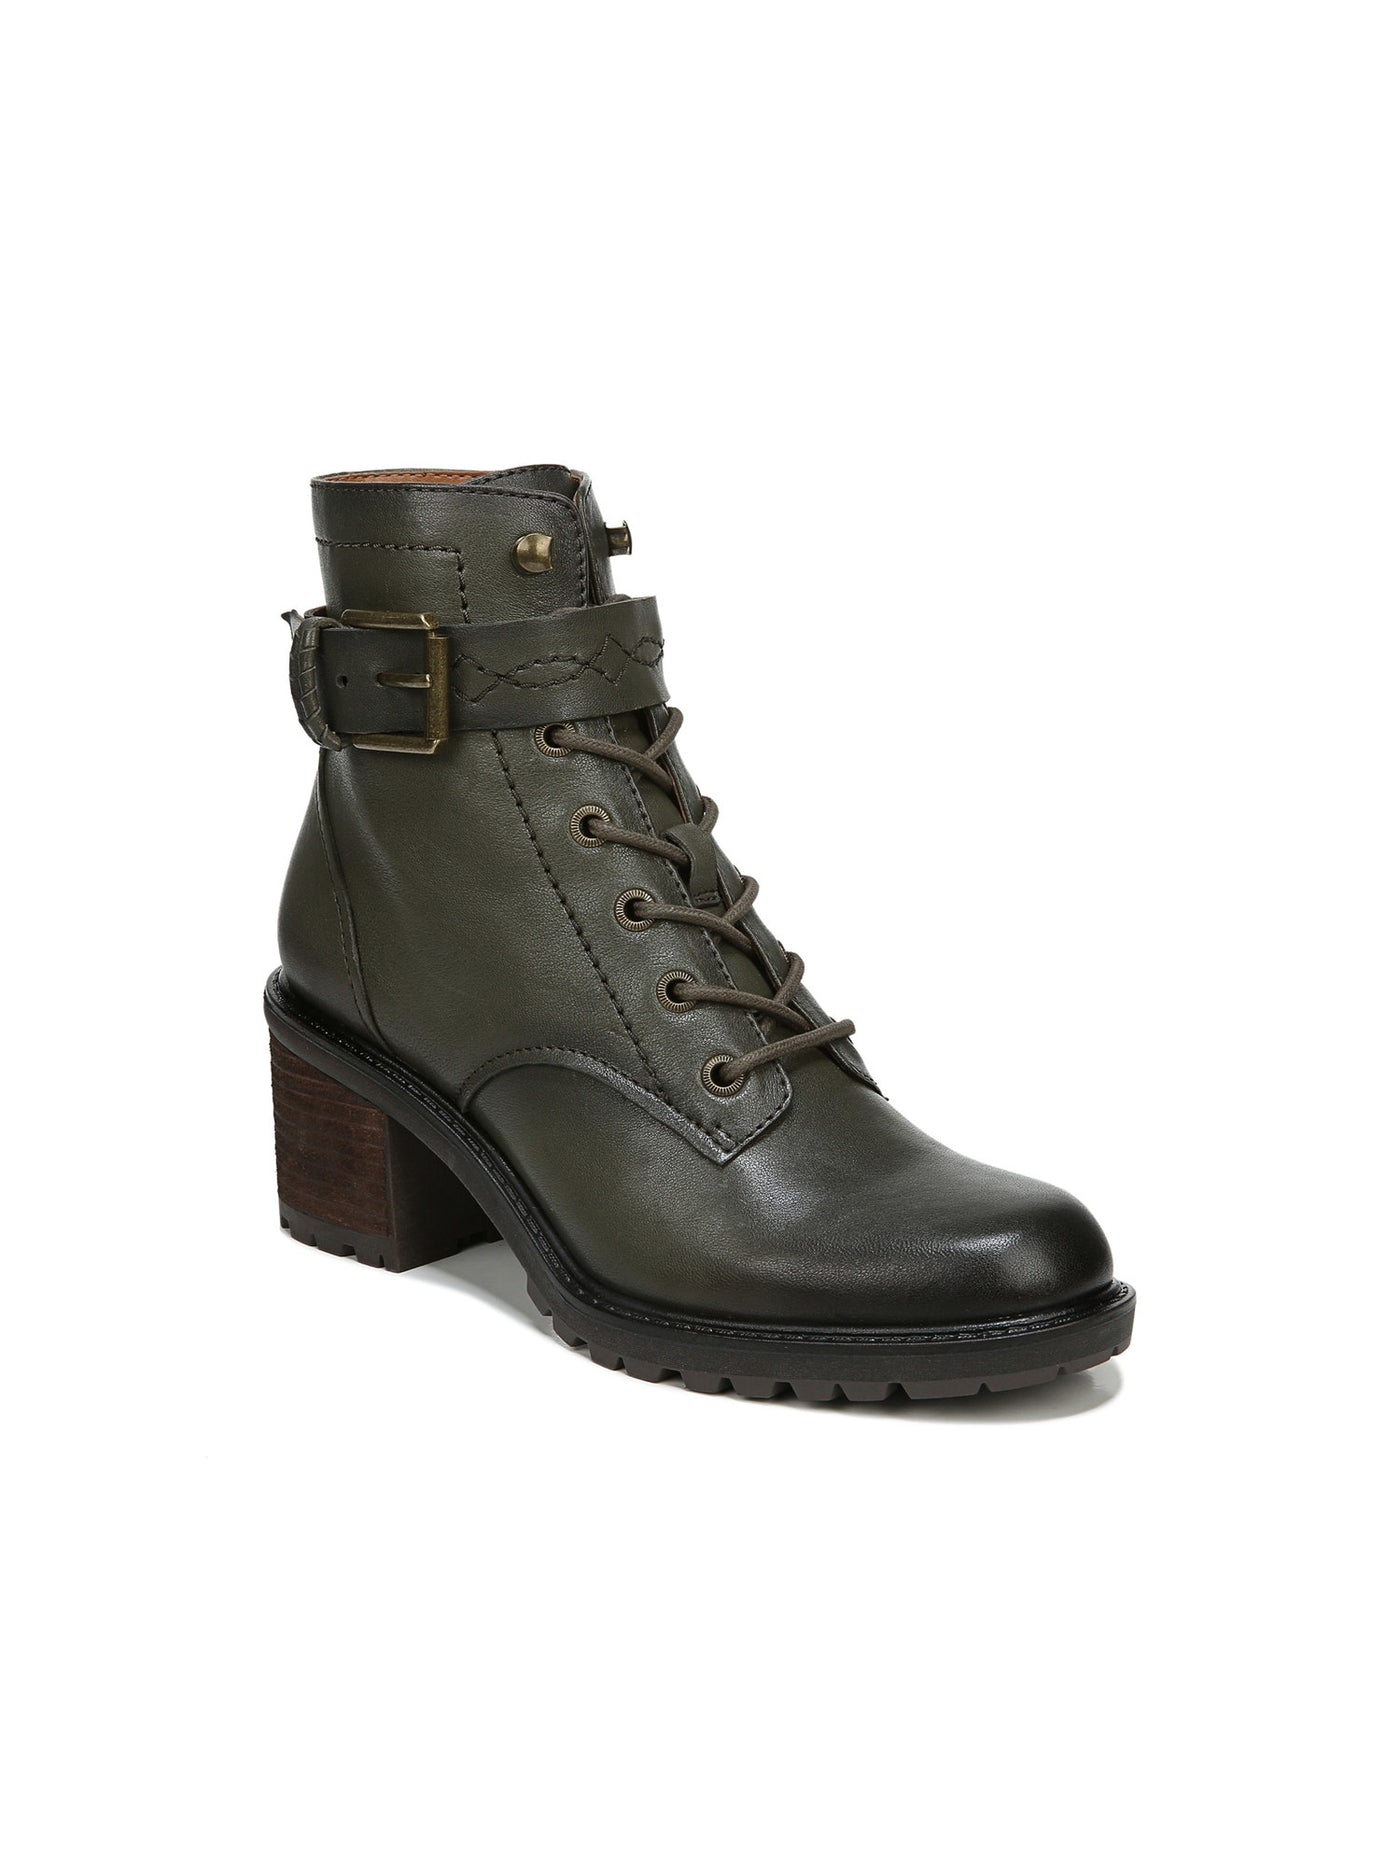 ZODIAC Womens Green Lace Up Styling Cushioned Buckle Accent Gemma Round Toe Block Heel Zip-Up Leather Combat Boots 8.5 M